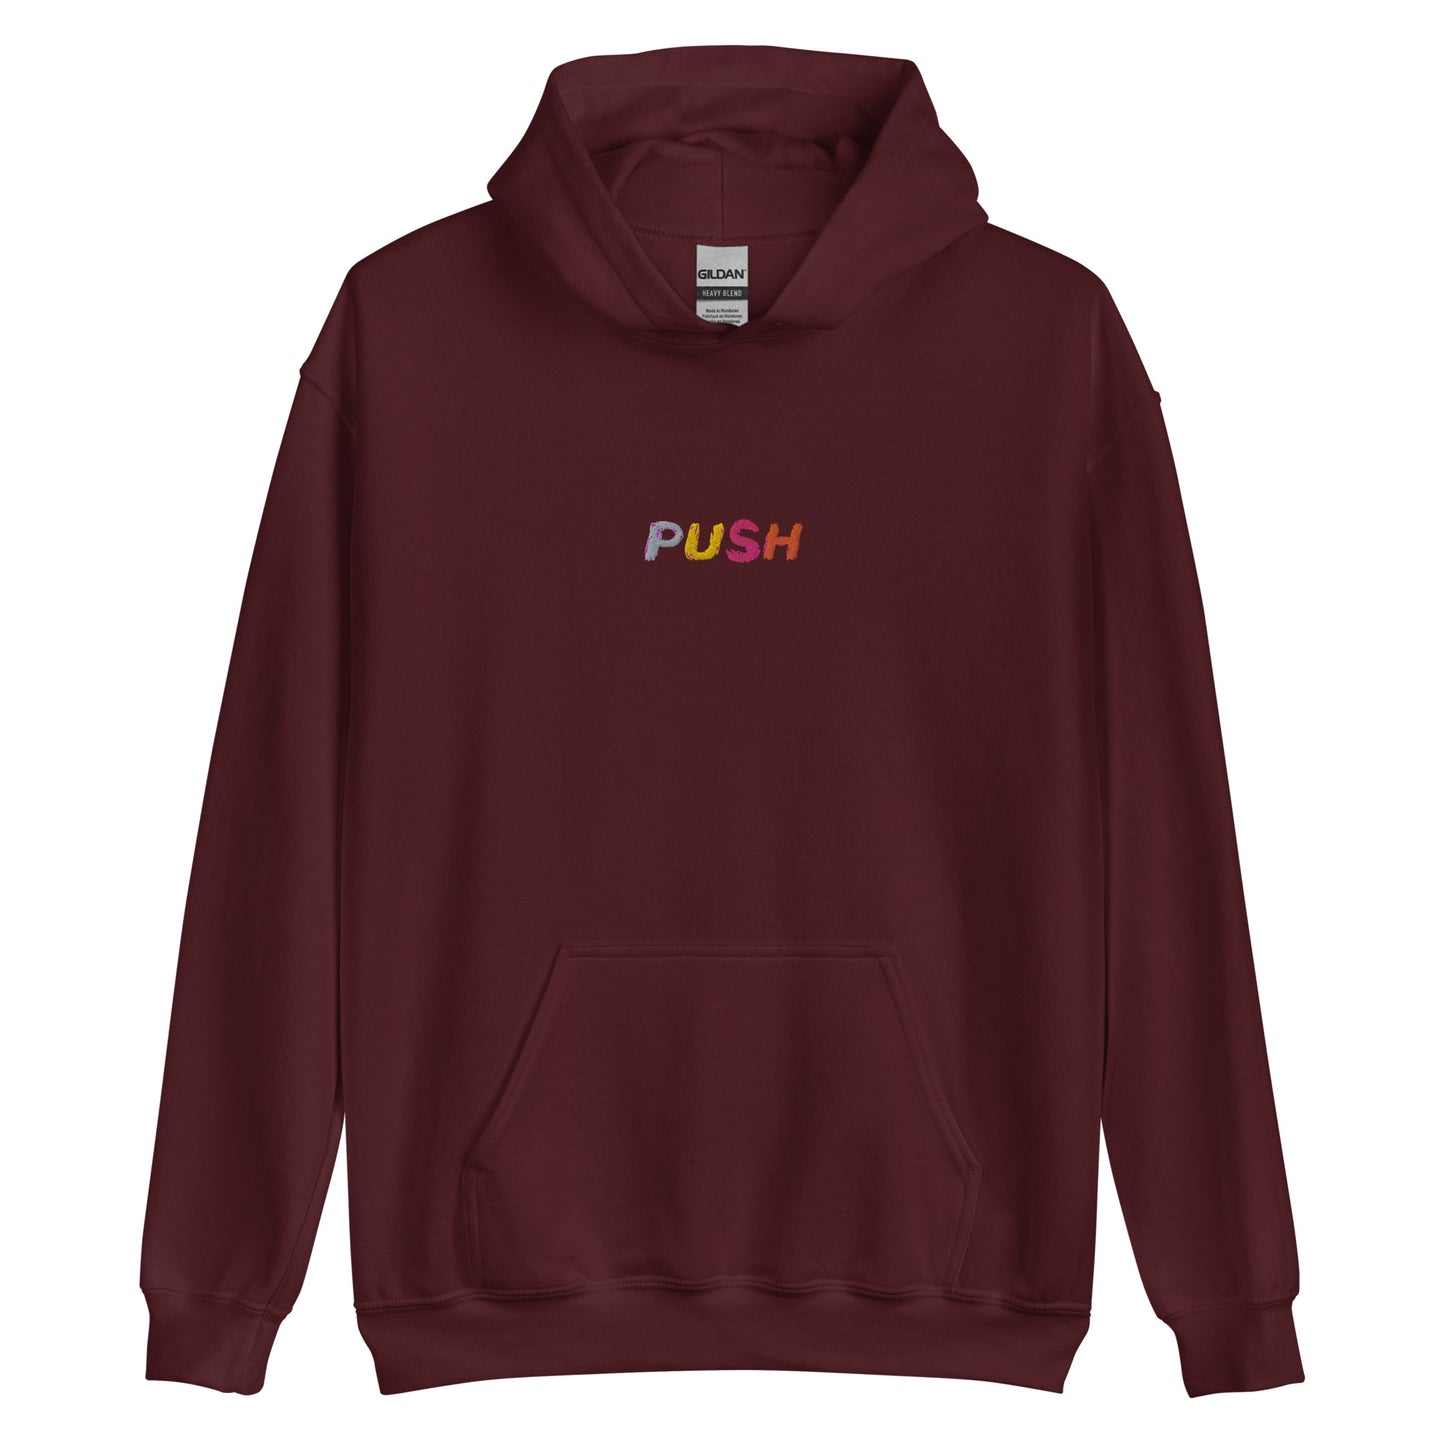 PUSH Embroidered Hoodie - dark red / S - Shirts & Tops